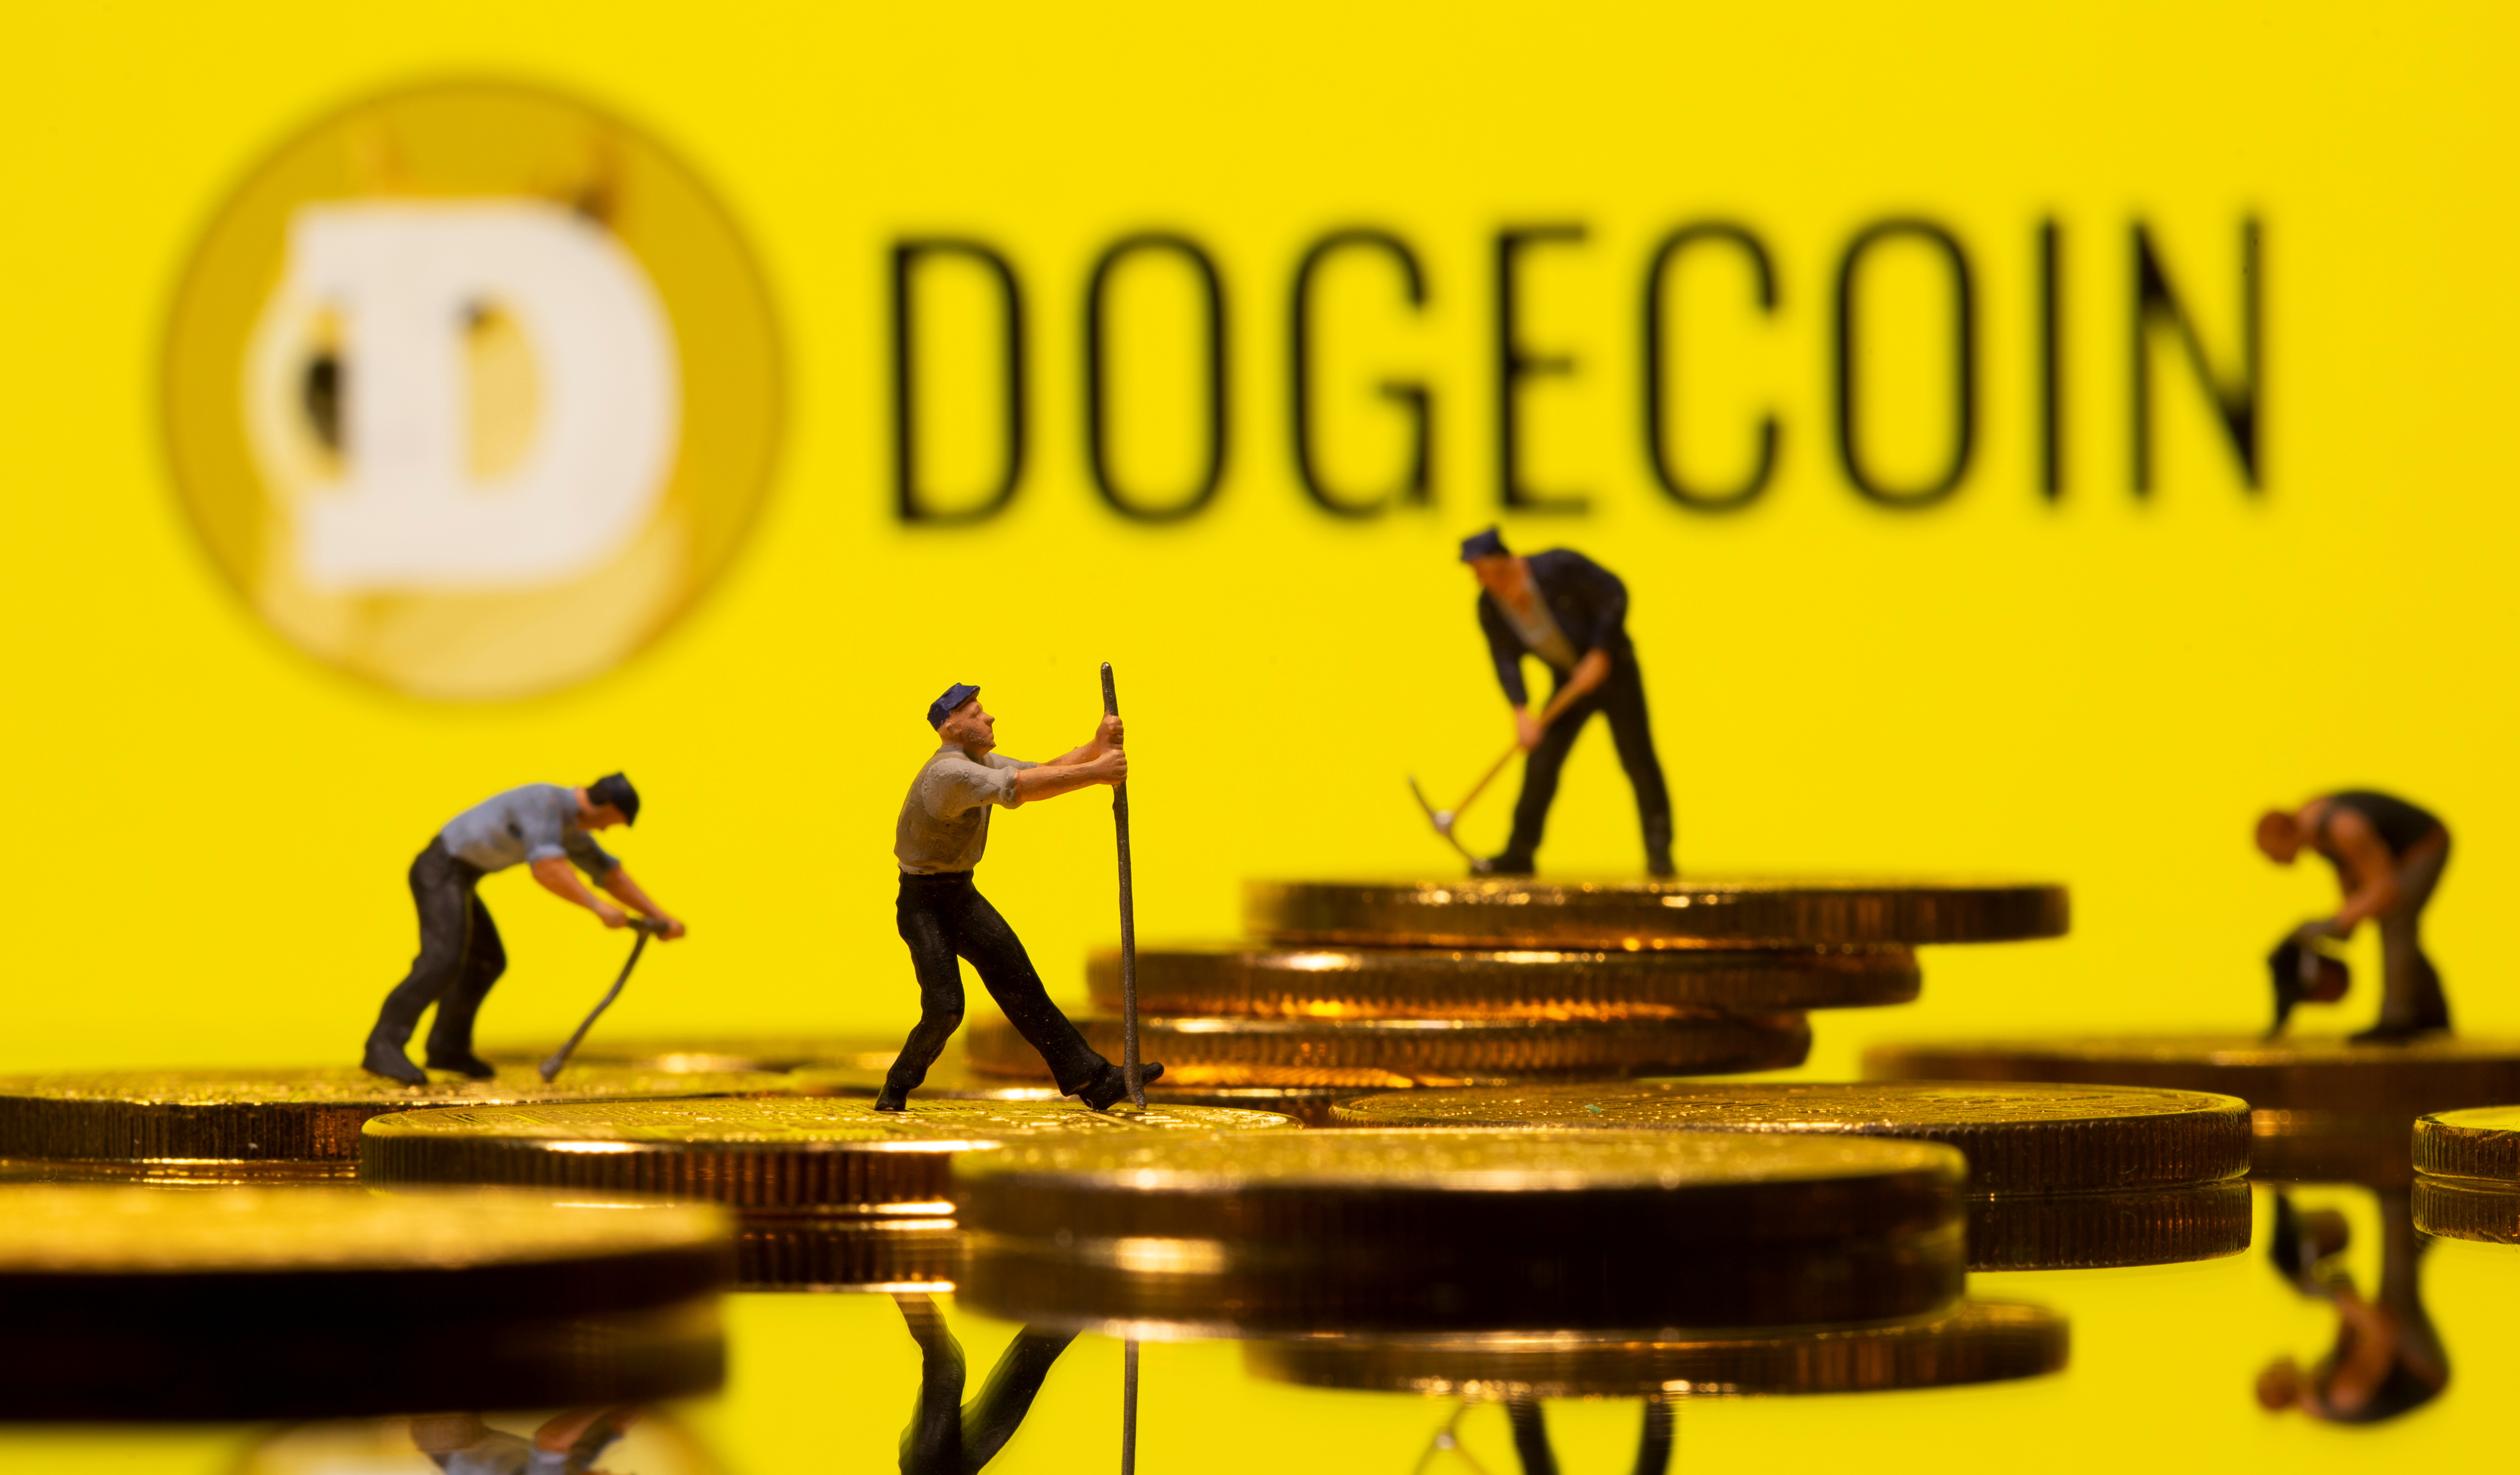 Small toy figures are seen on the cryptocurrency representation with Dogecoin logo in the background in this illustration